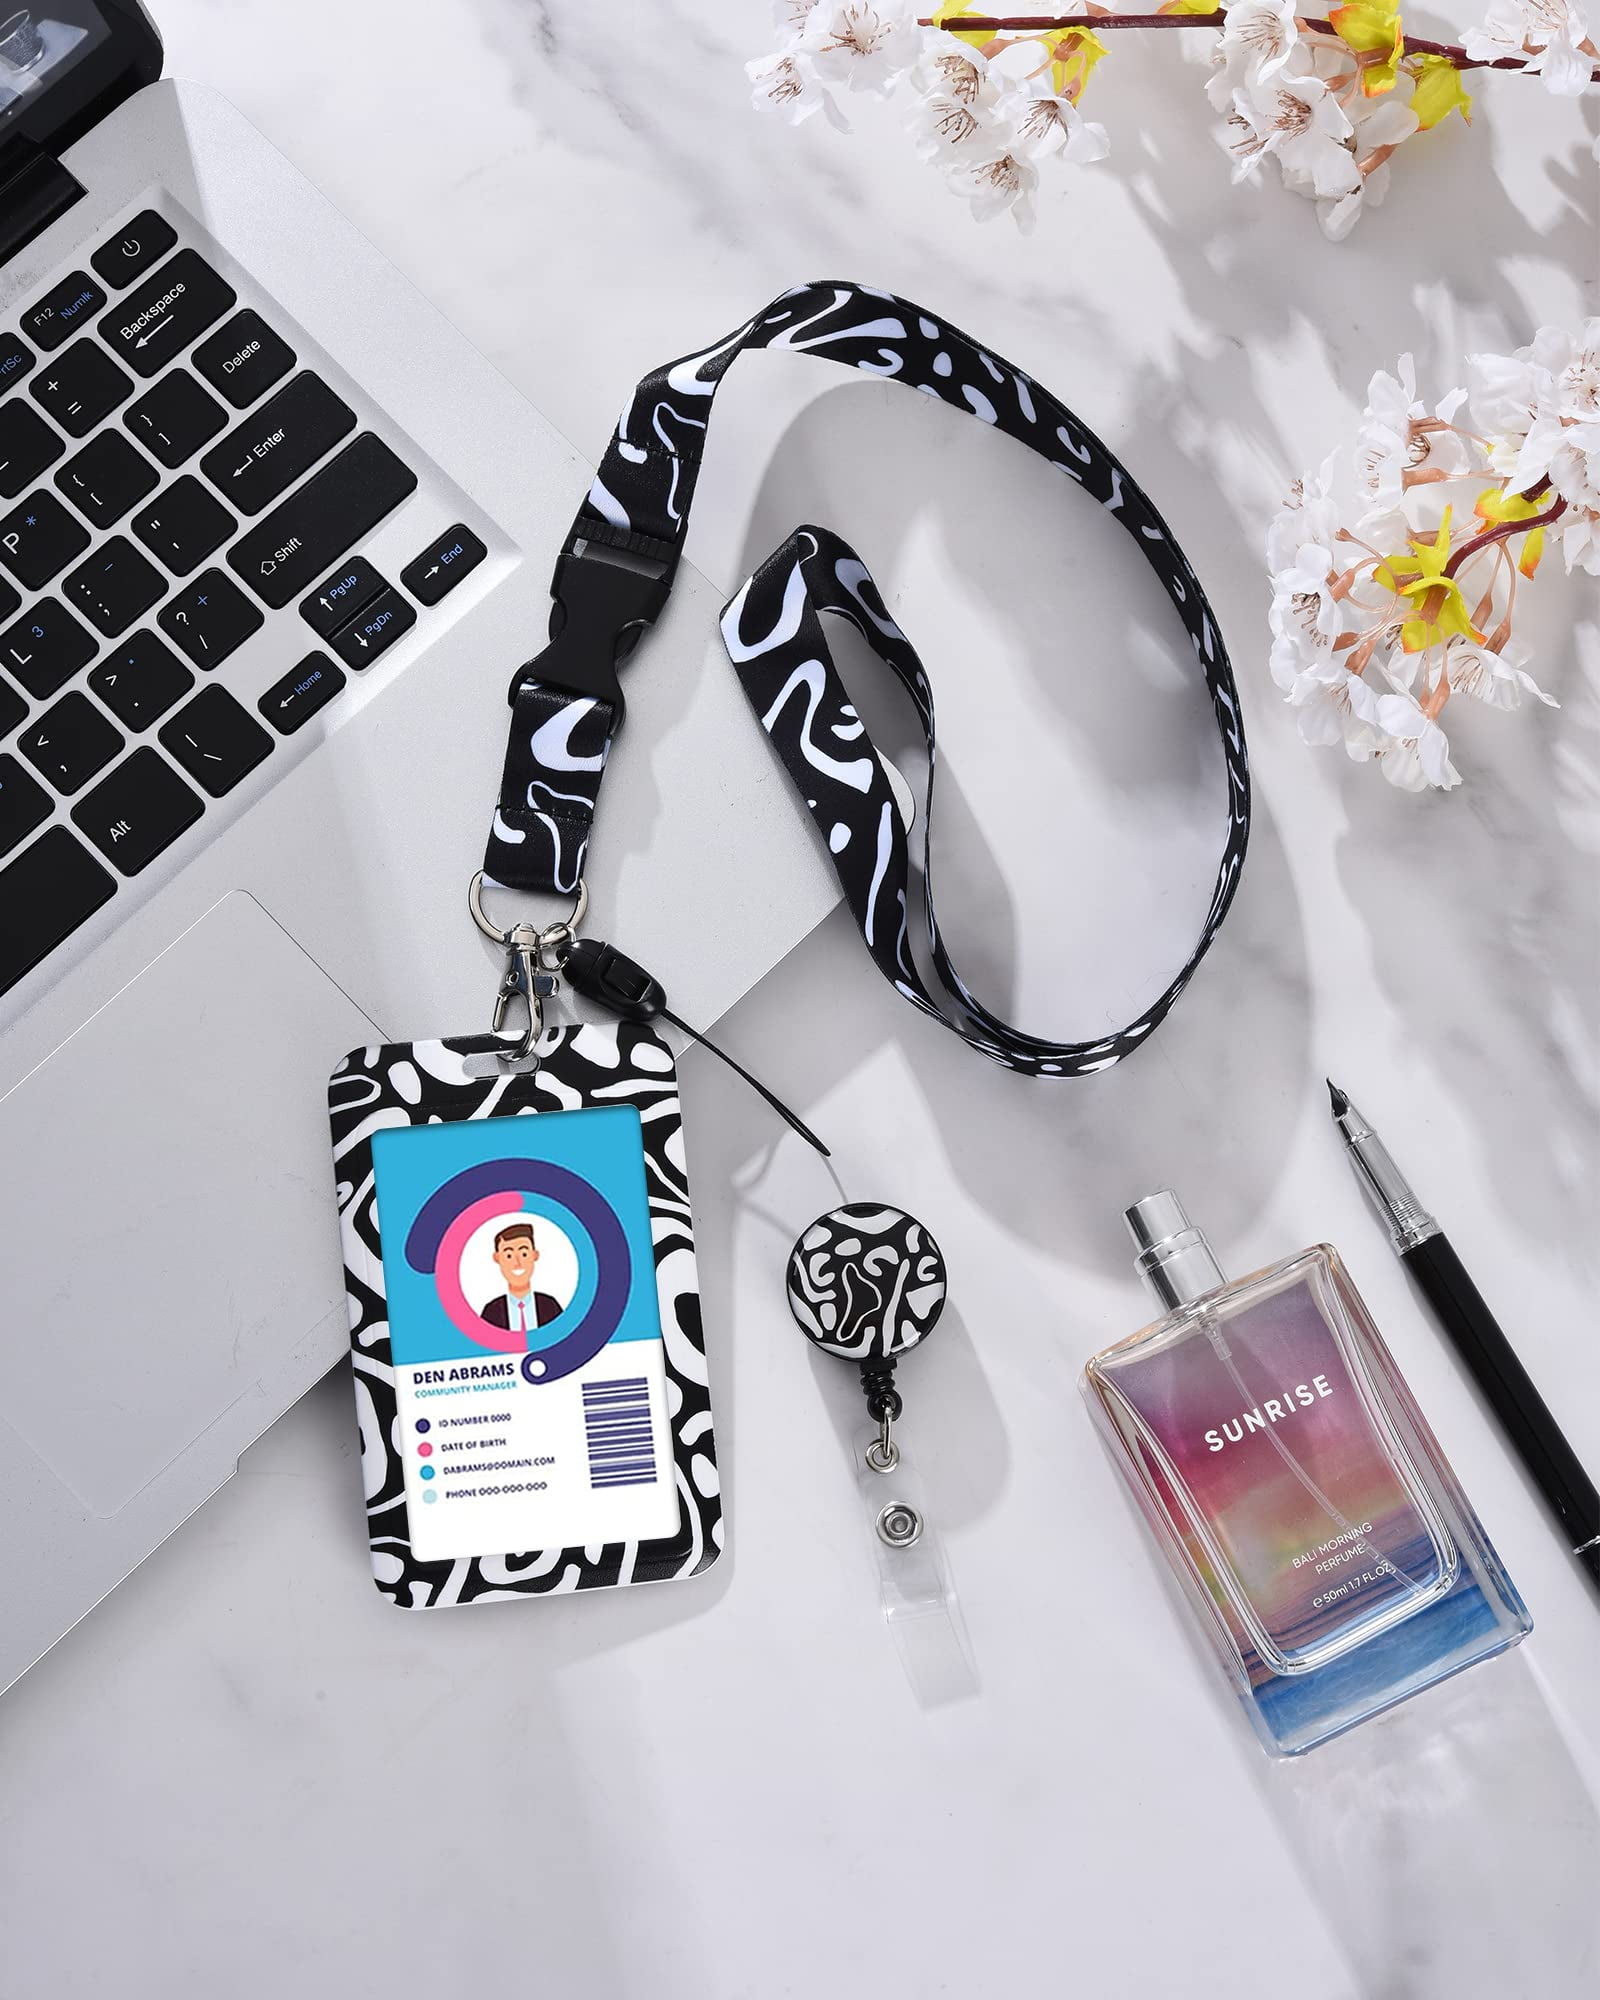 Personalized Vertical ID Badge Holder with Lanyard - Fashionable ID Card  Holders with Detachable Nec…See more Personalized Vertical ID Badge Holder